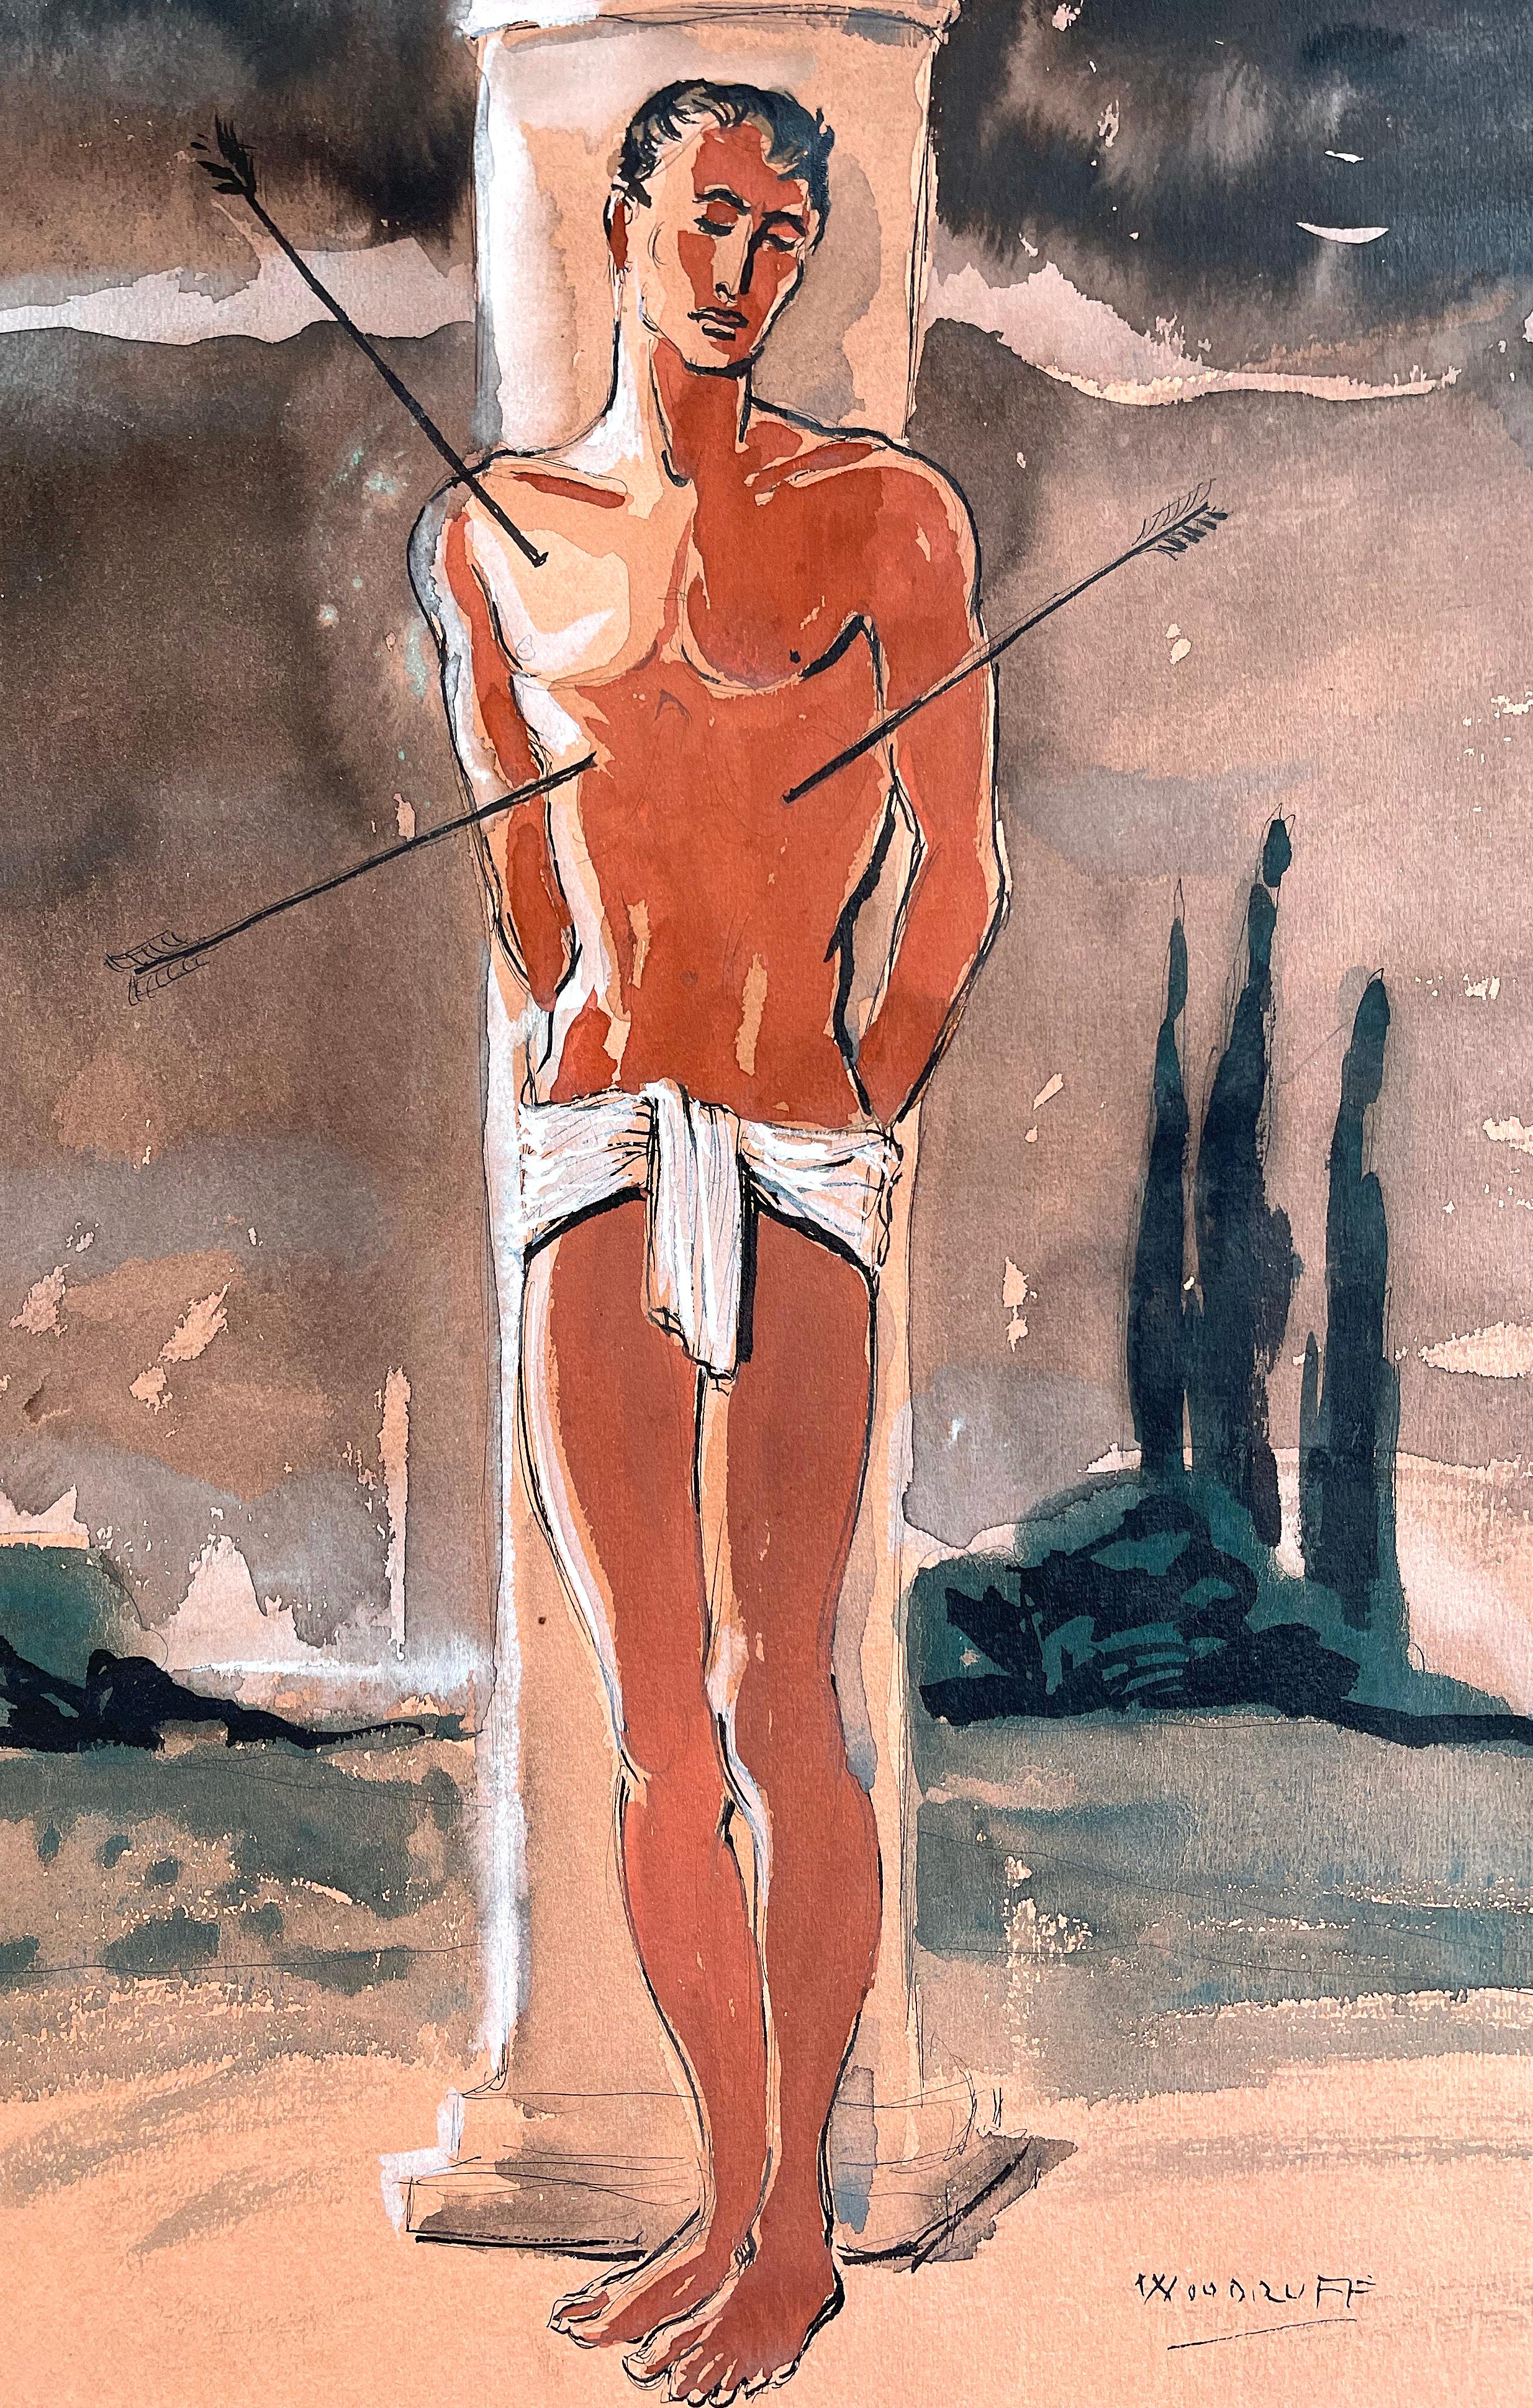 This sensitive depiction of St. Sebastian, pierced by a myriad of arrows but not yet expired, was painted by Porter Woodruff in a gorgeous combination of watercolor, gouache and ink. The saint is shown against an Ionic column, with a dark and